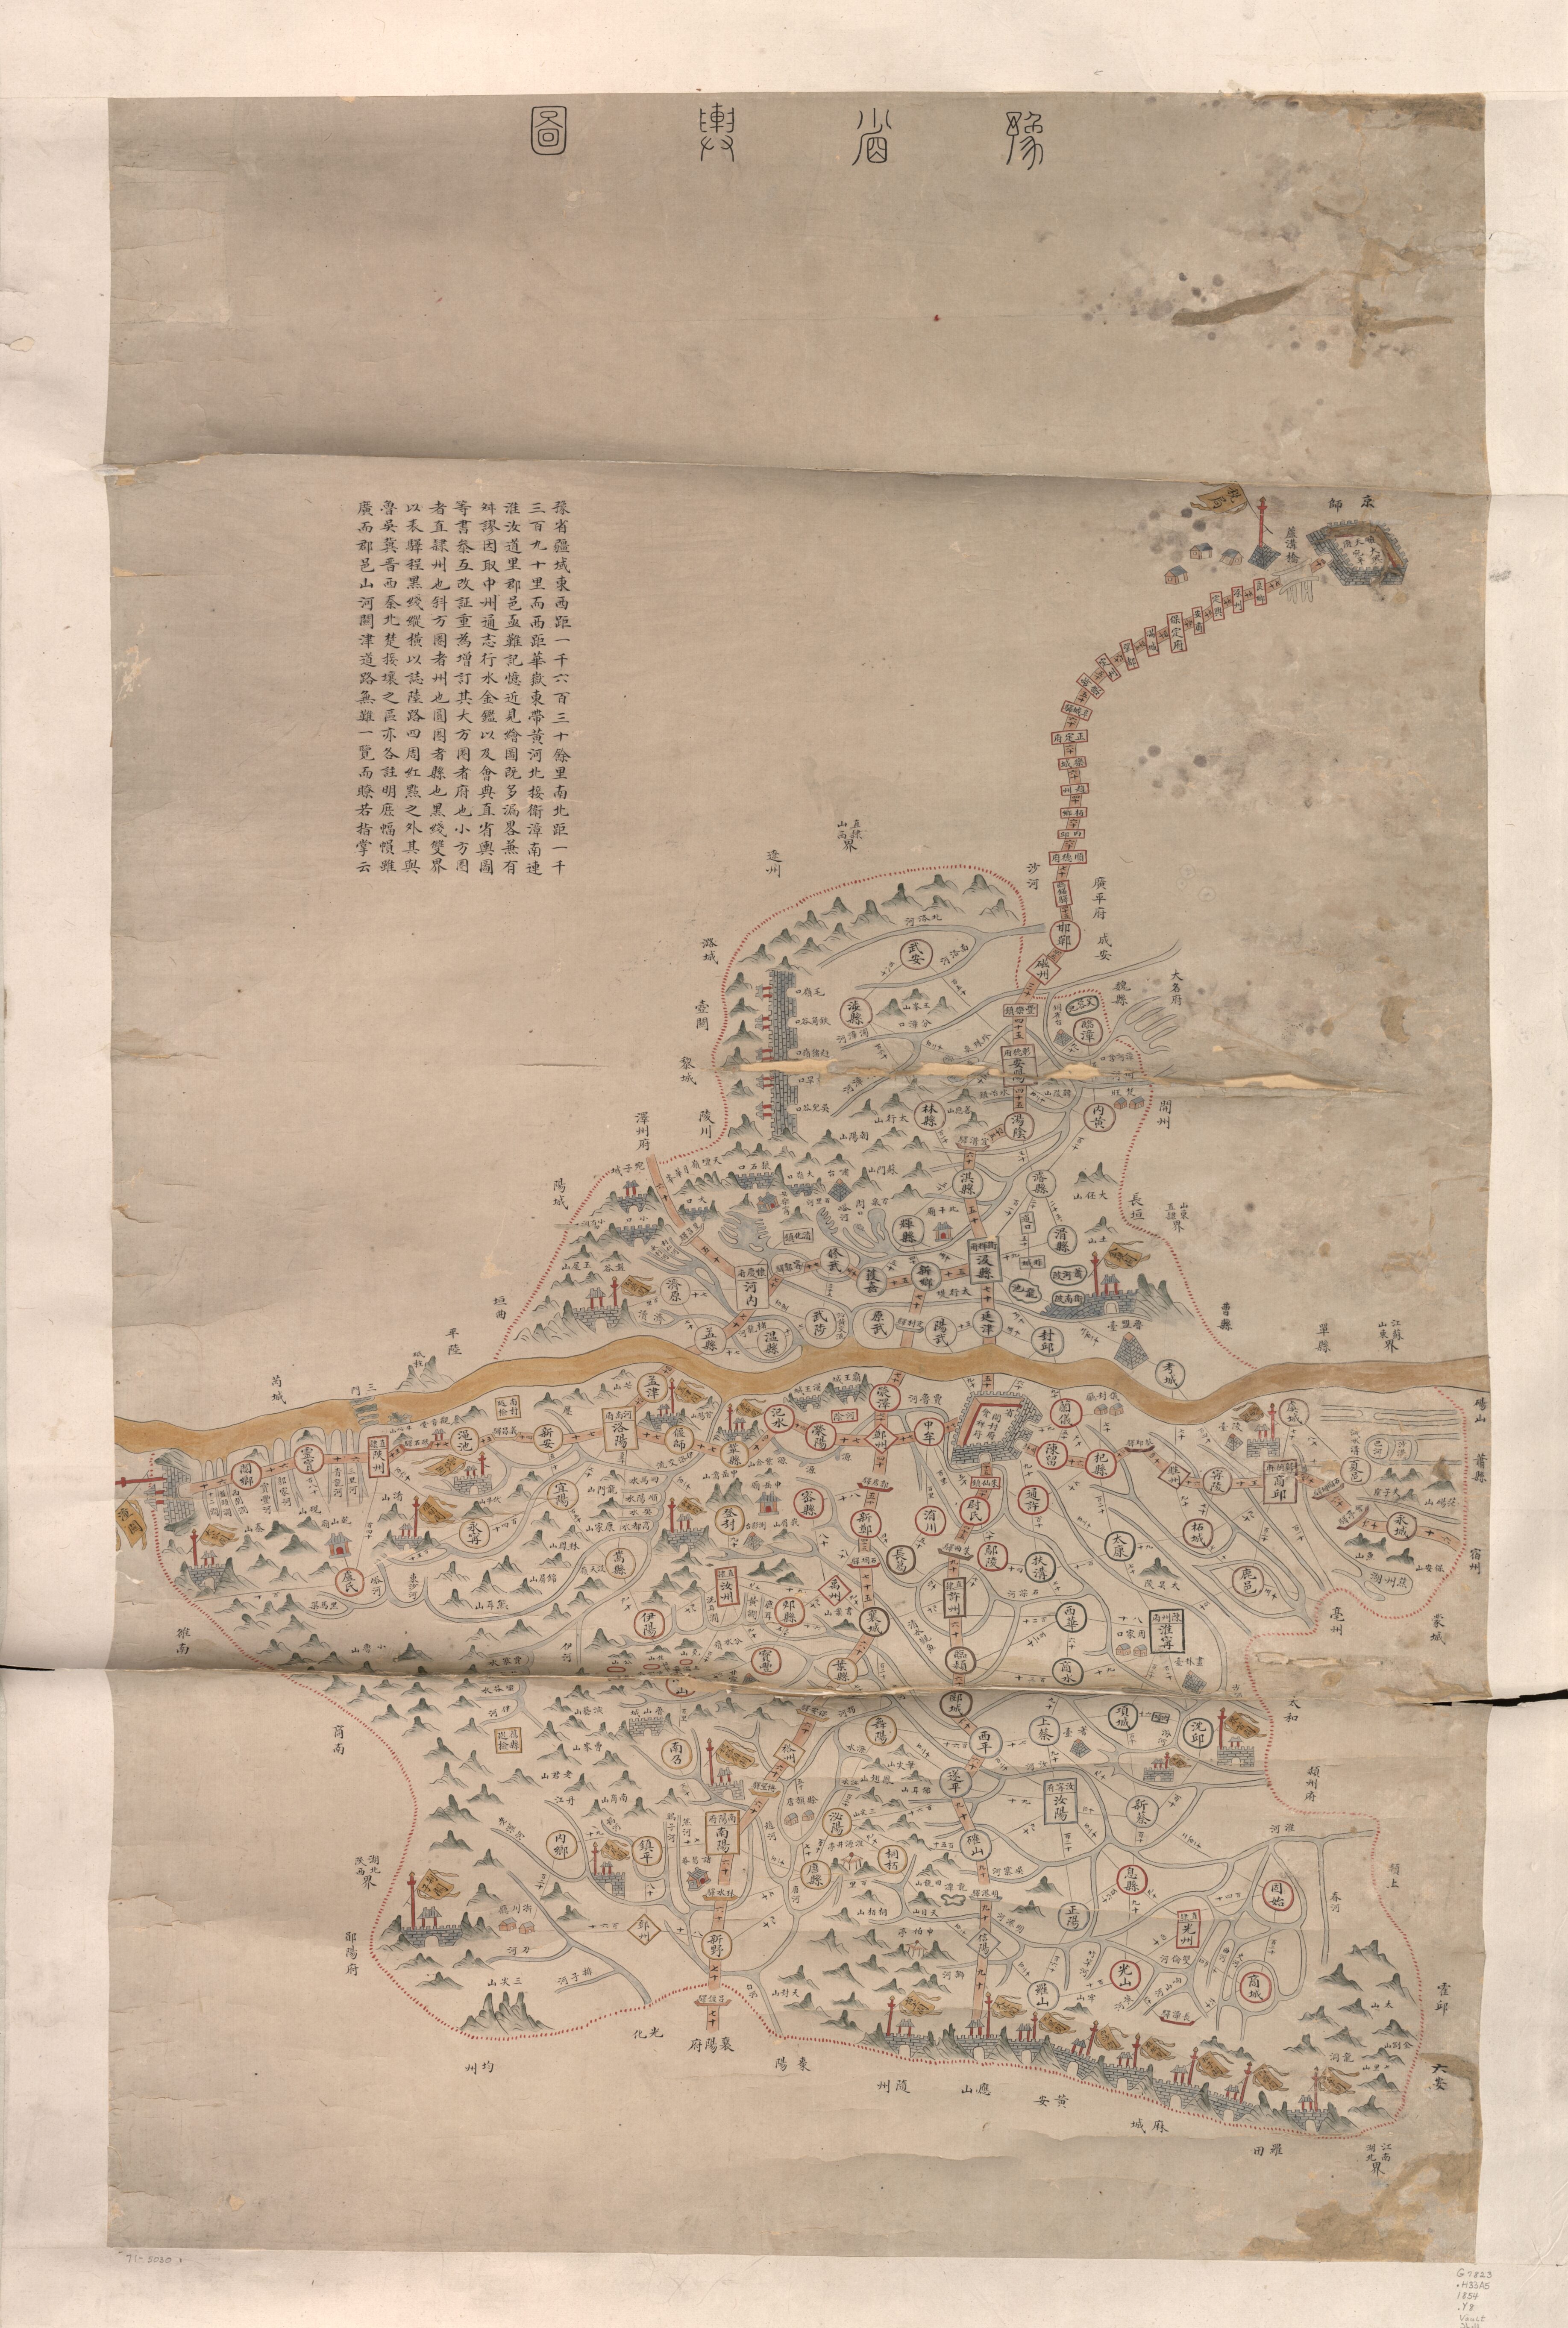 This old map of Yu Sheng Yu Tu. (豫省輿圖, Jing Hui Henan Tu, Map of Henan Province) from 1832 was created by Arthur W. (Arthur William) Hummel in 1832